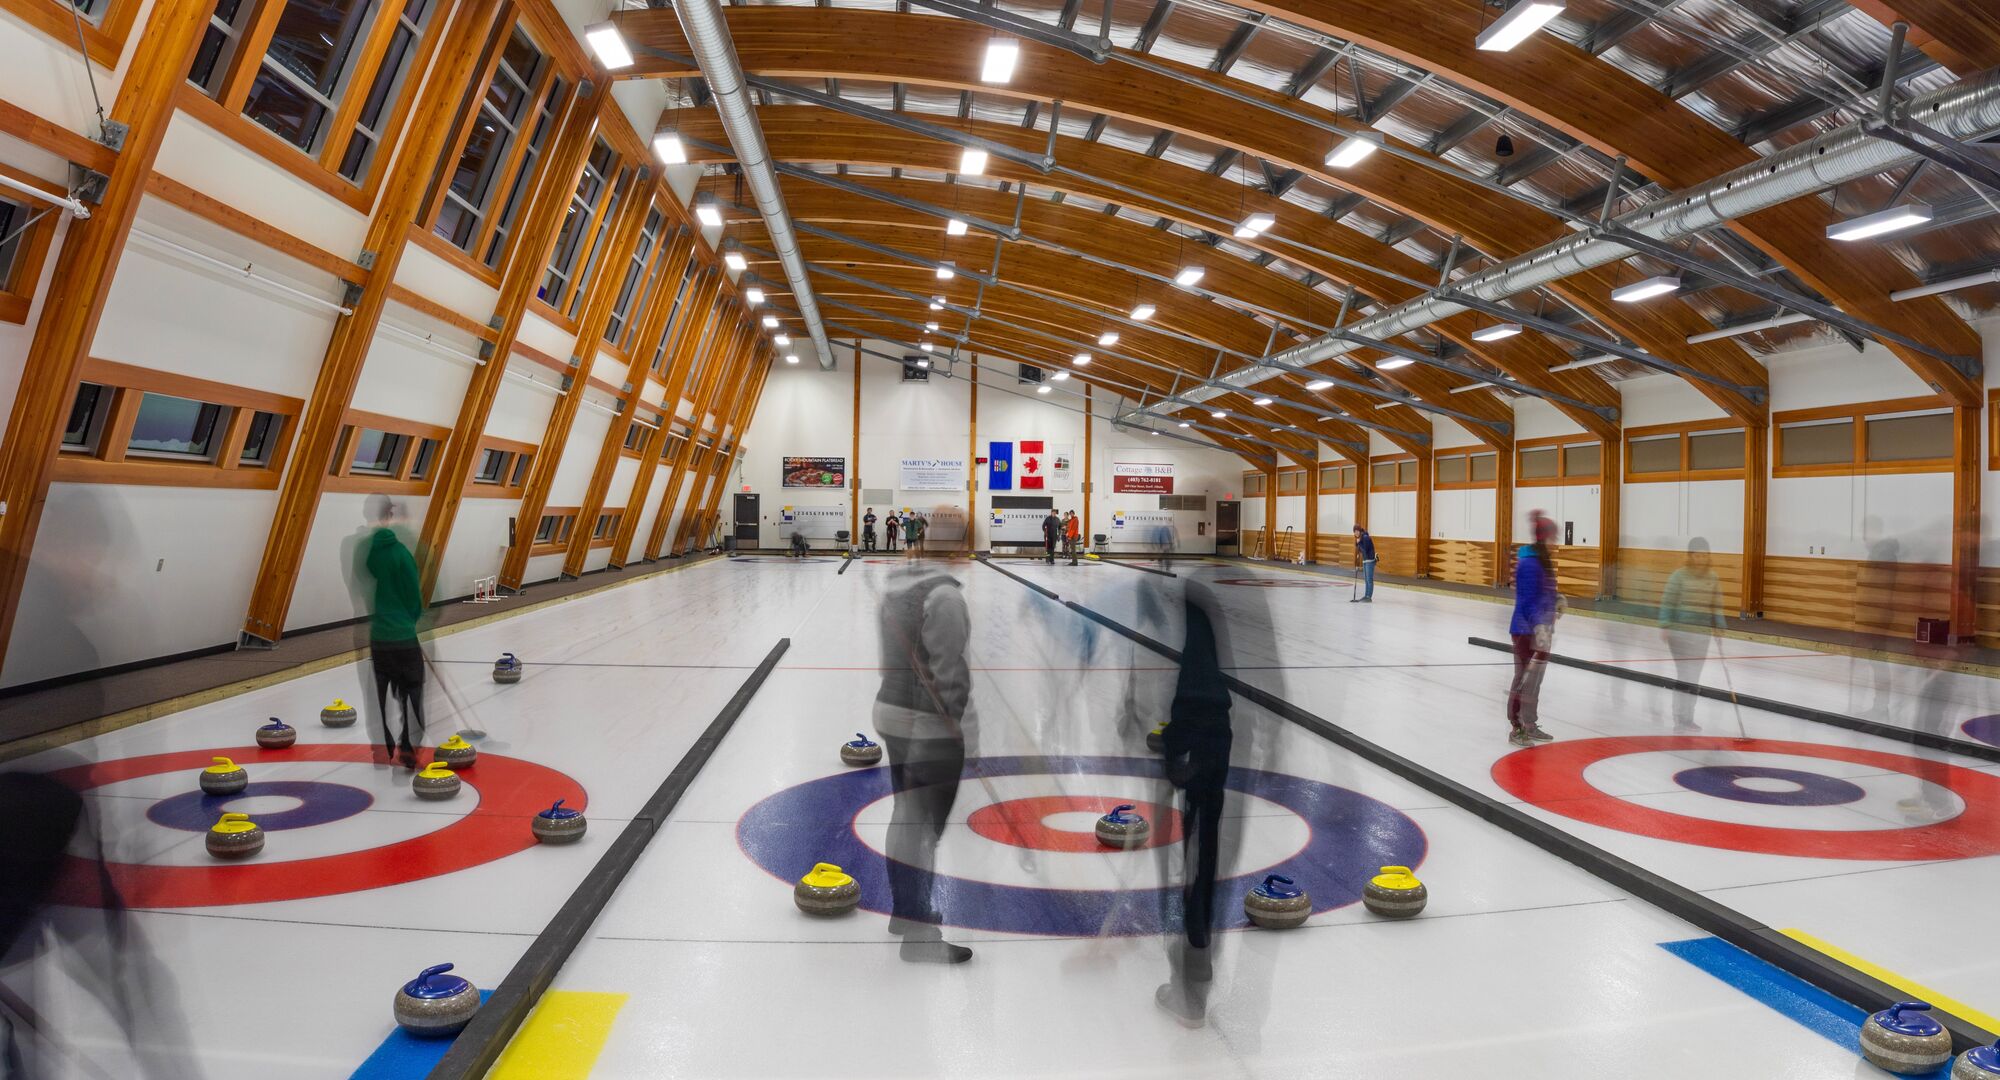 National Curling Day Festival